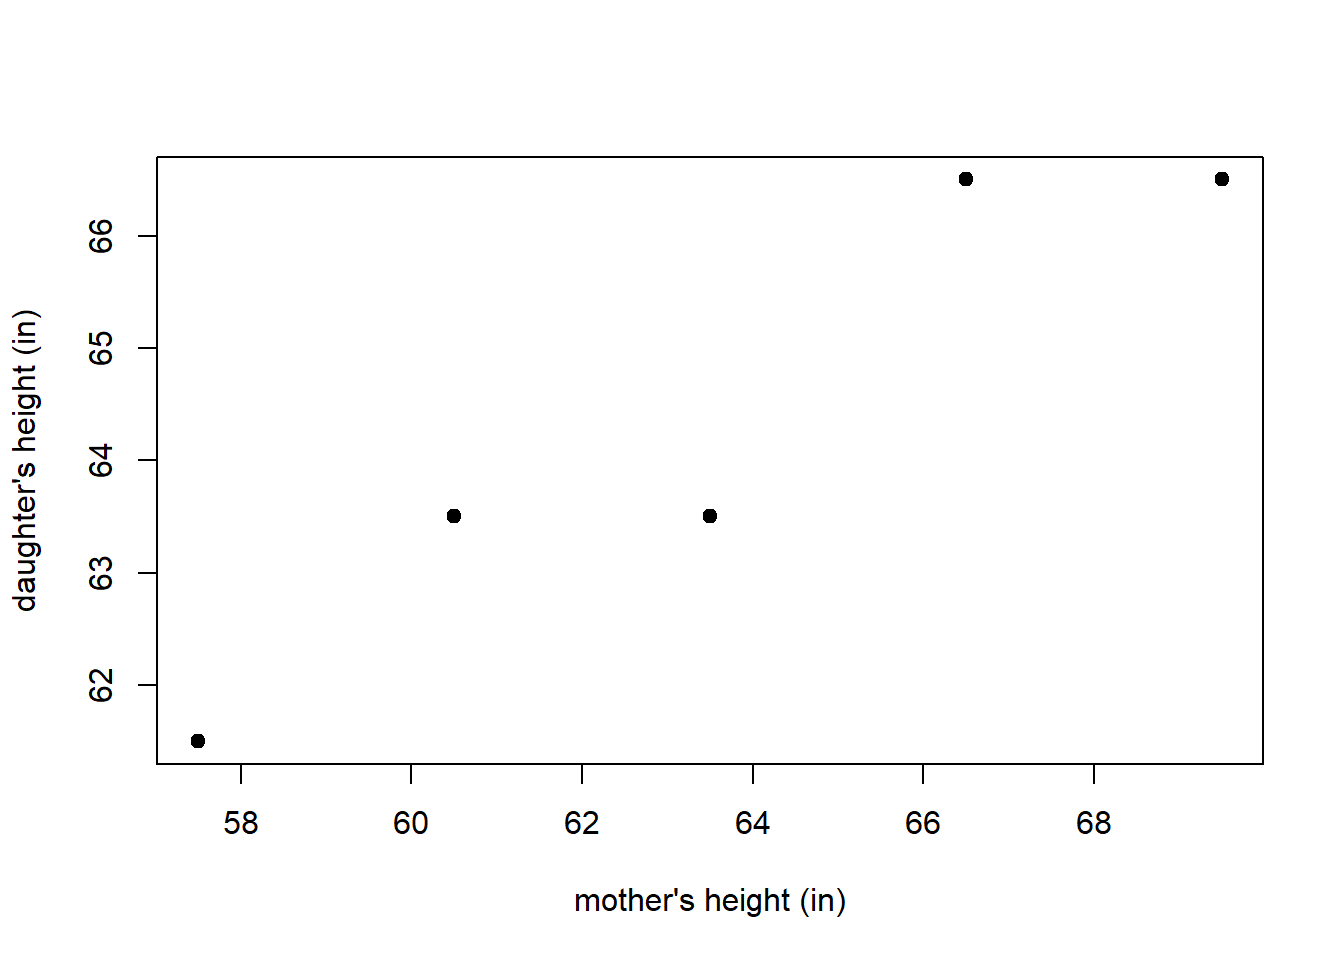 A scatter plot displaying pairs of heights for a mother and her adult daughter.